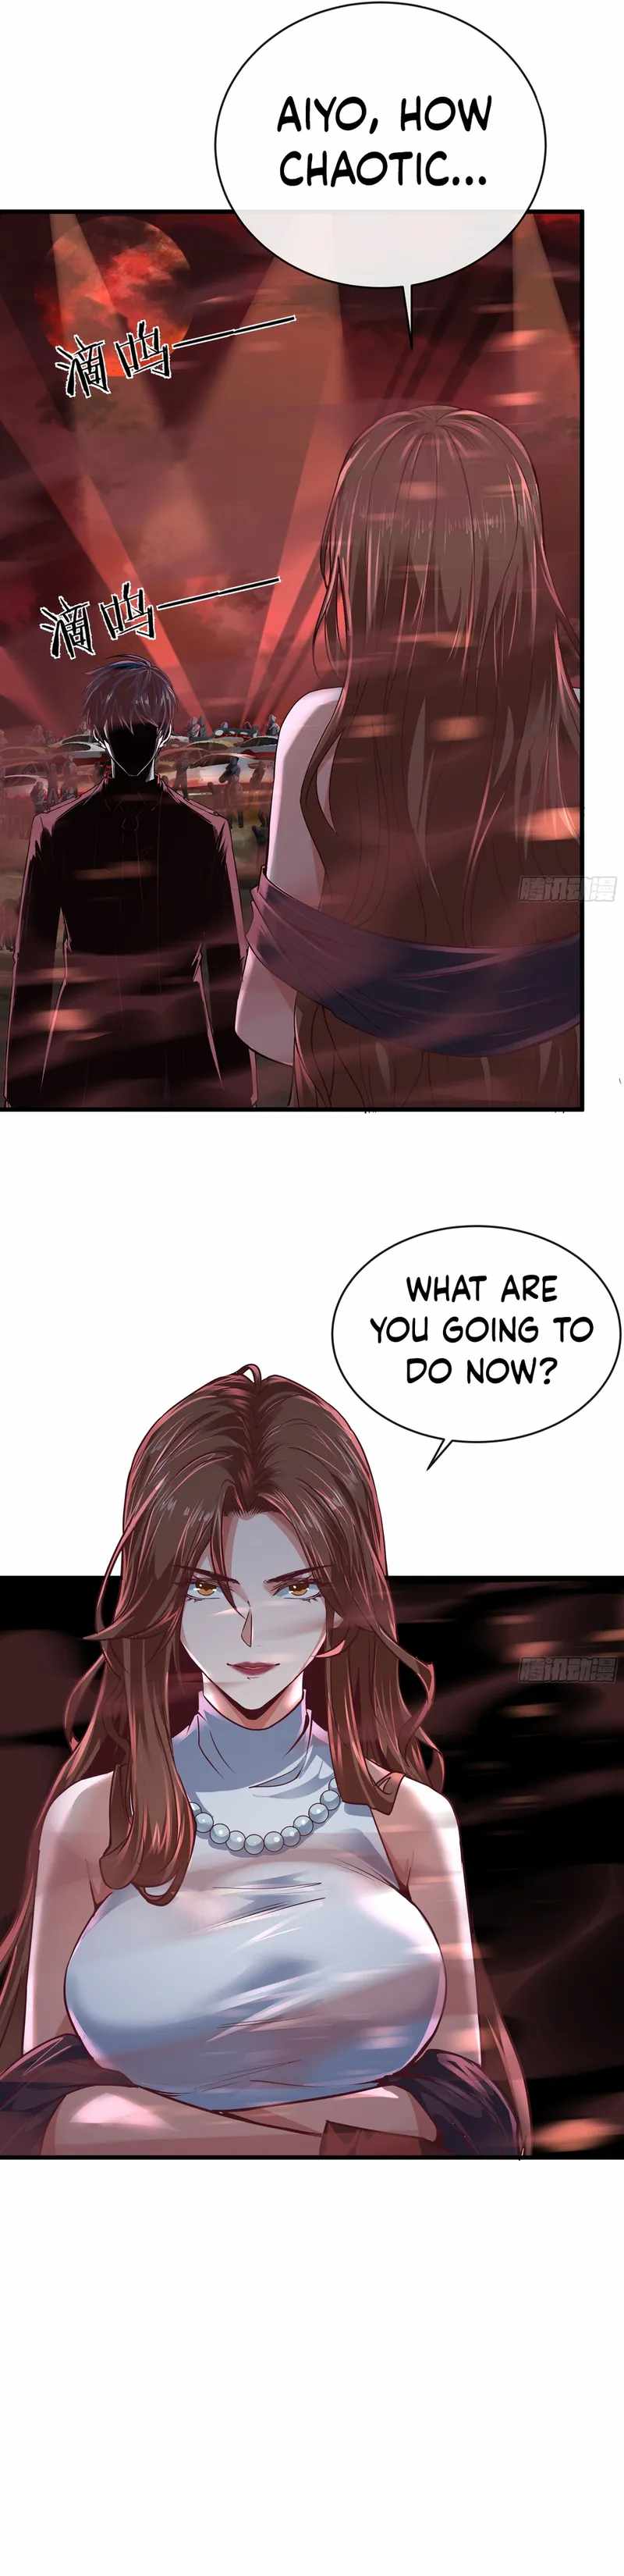 Since The Red Moon Appeared Chapter 39